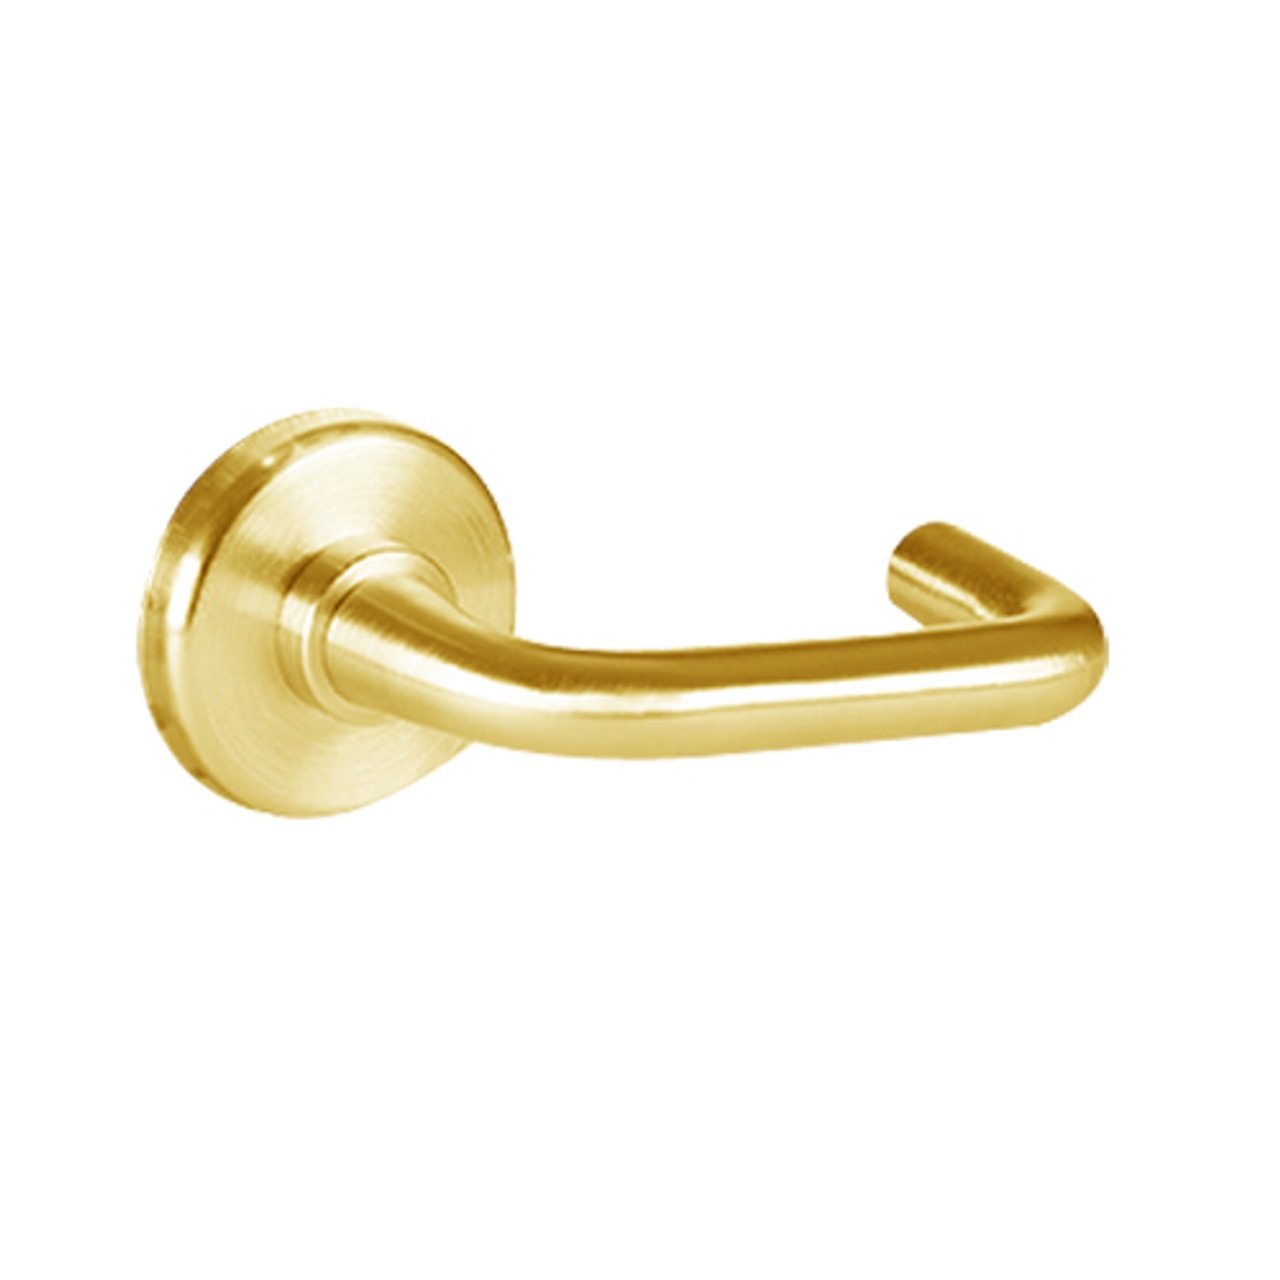 40HTKOS33R605 Best 40H Series Trim Kits Outside Lever w/ Emergency Plate with Solid Tube-Return Trim Style in Bright Brass